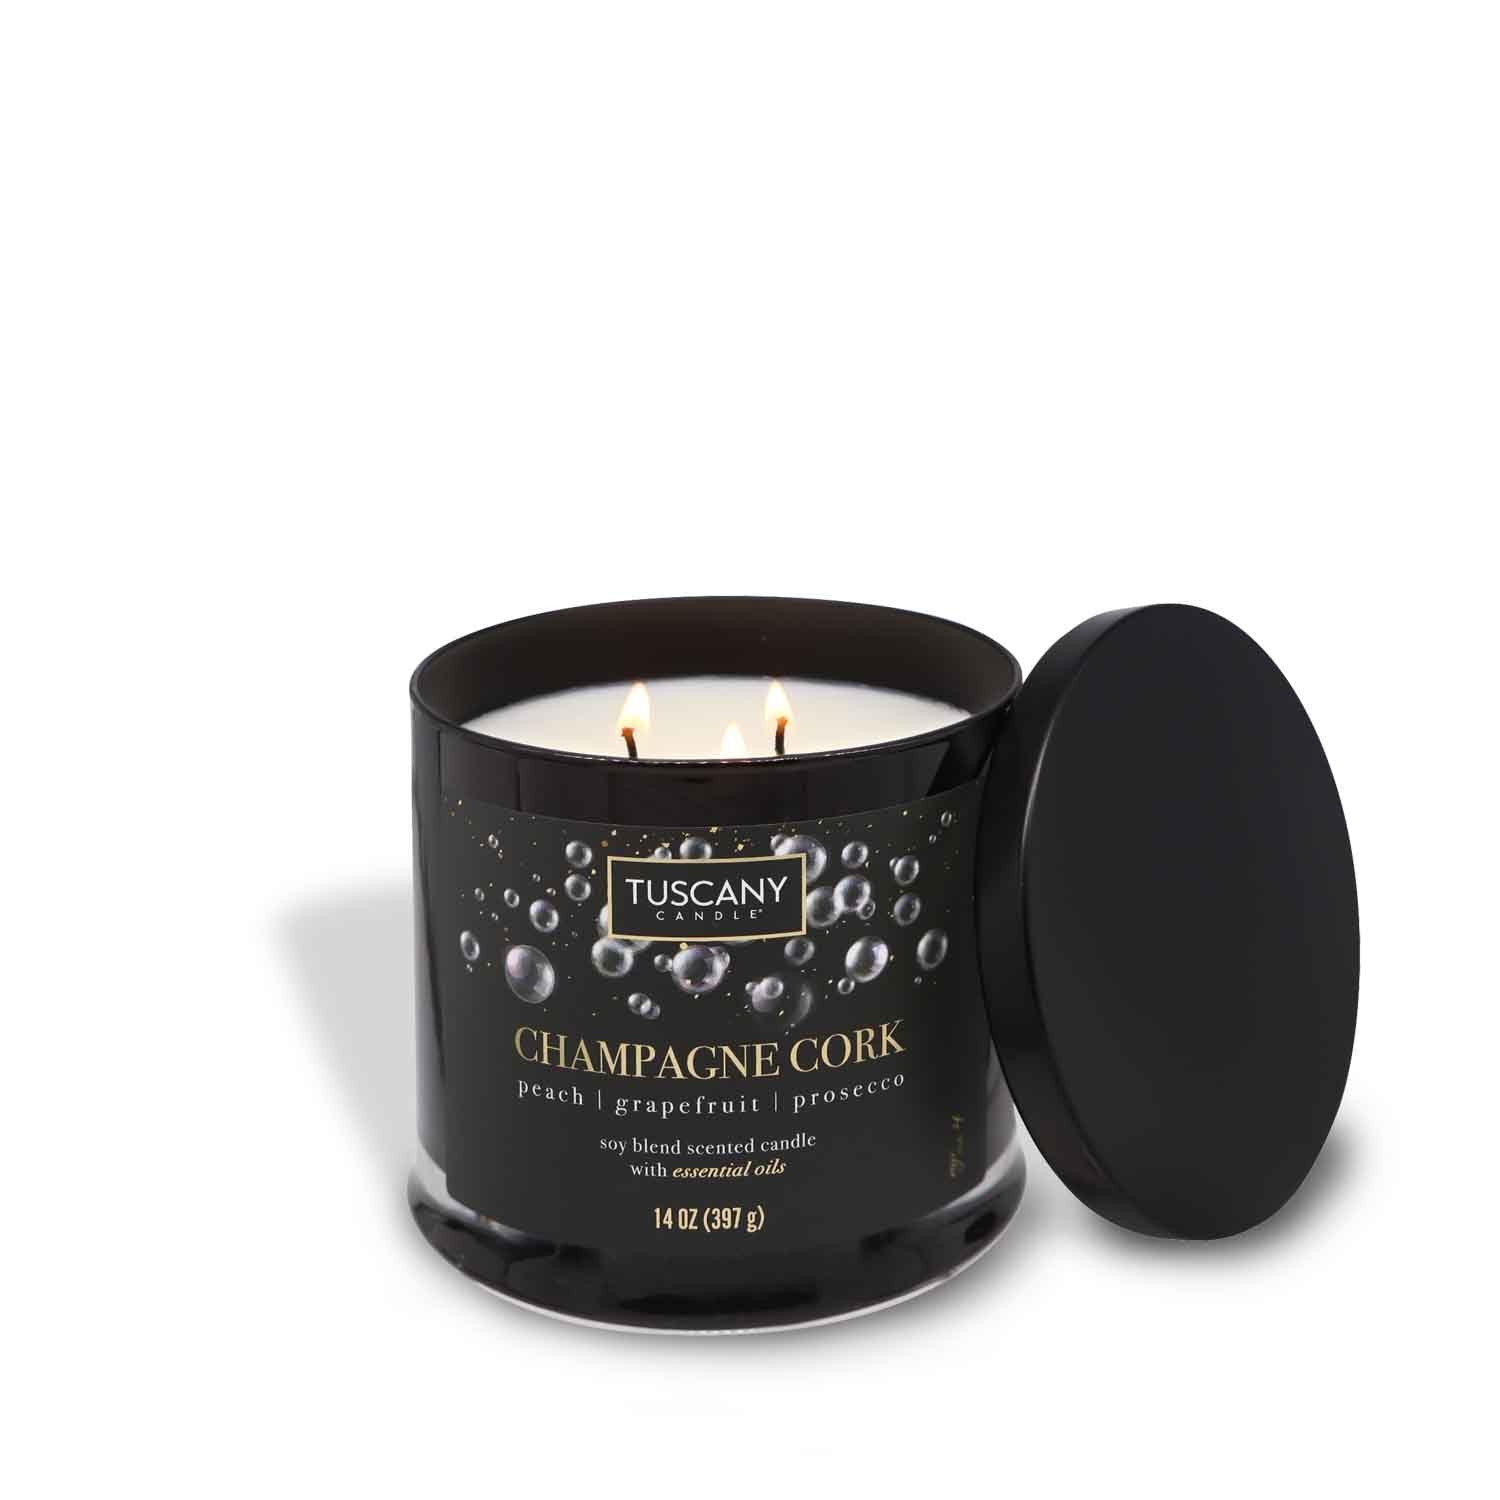 New Year's Eve 'Champagne Cork' candle, effervescing with the sparkling notes of Prosecco, sweetened peach, and zesty grapefruit, capturing the essence of festive celebrations.